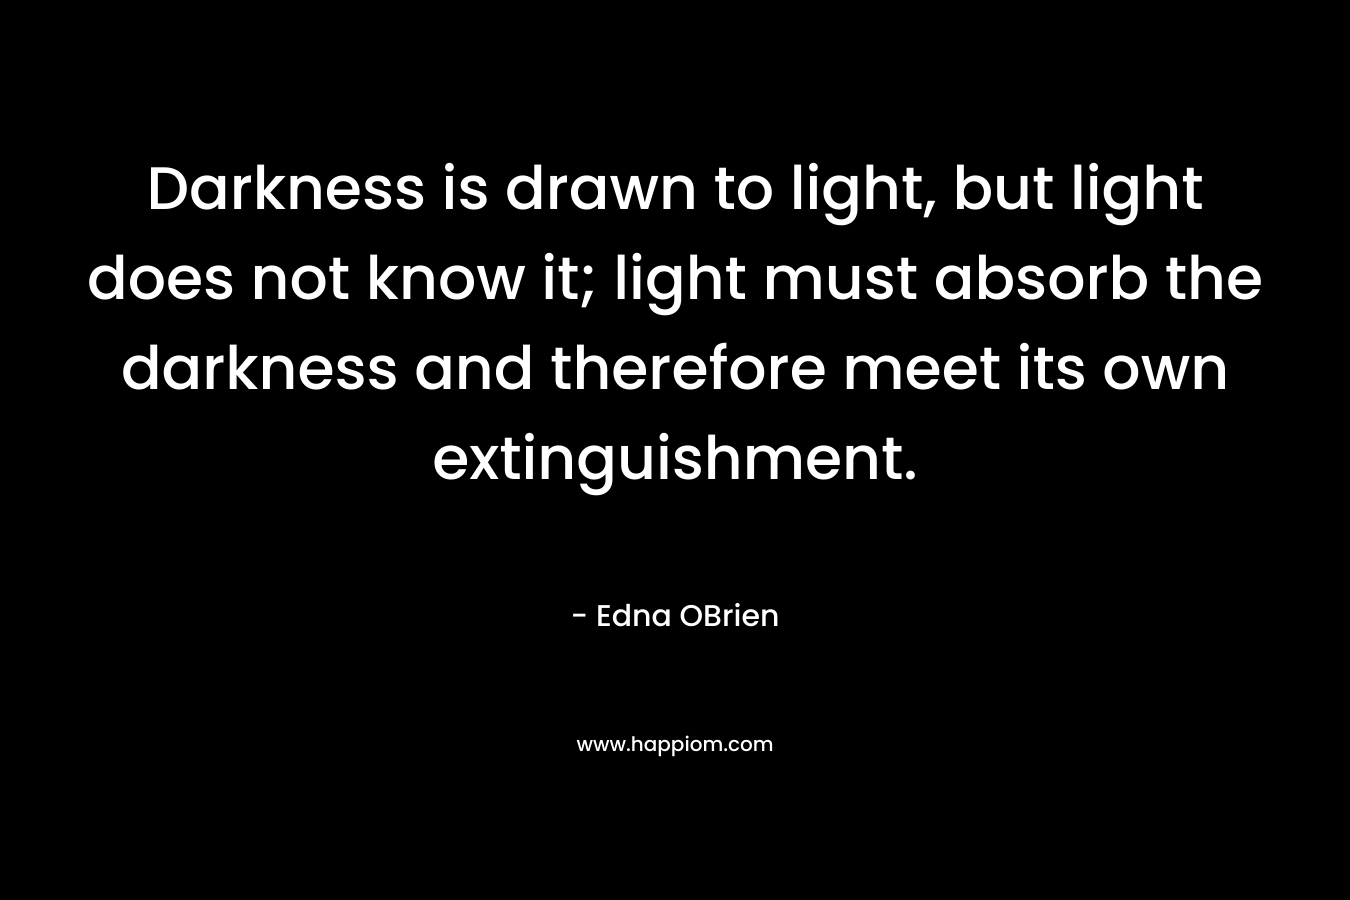 Darkness is drawn to light, but light does not know it; light must absorb the darkness and therefore meet its own extinguishment.